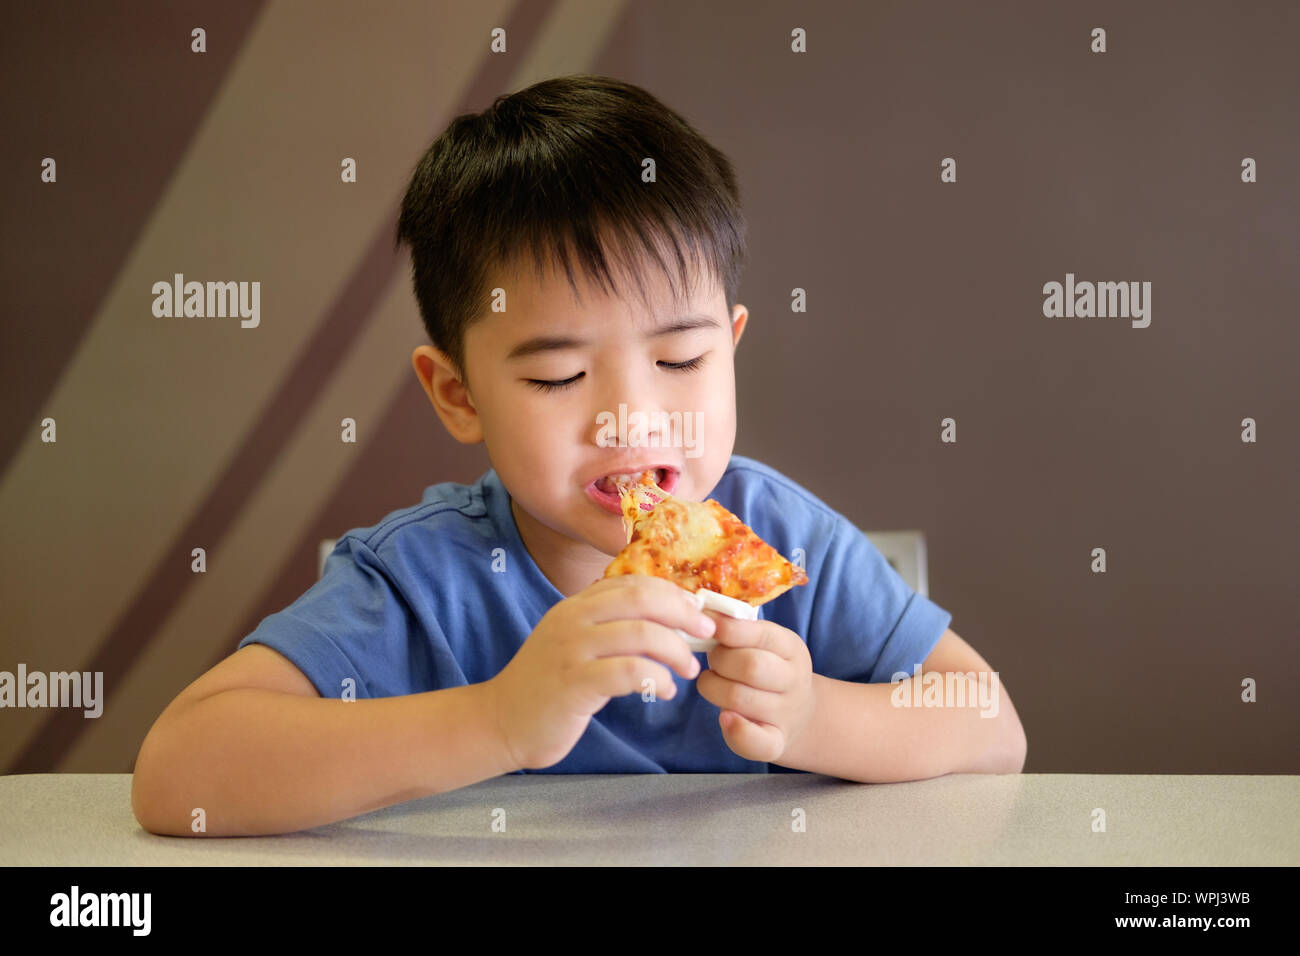 Asian boy is happy to eat pizza on brown background. Stock Photo